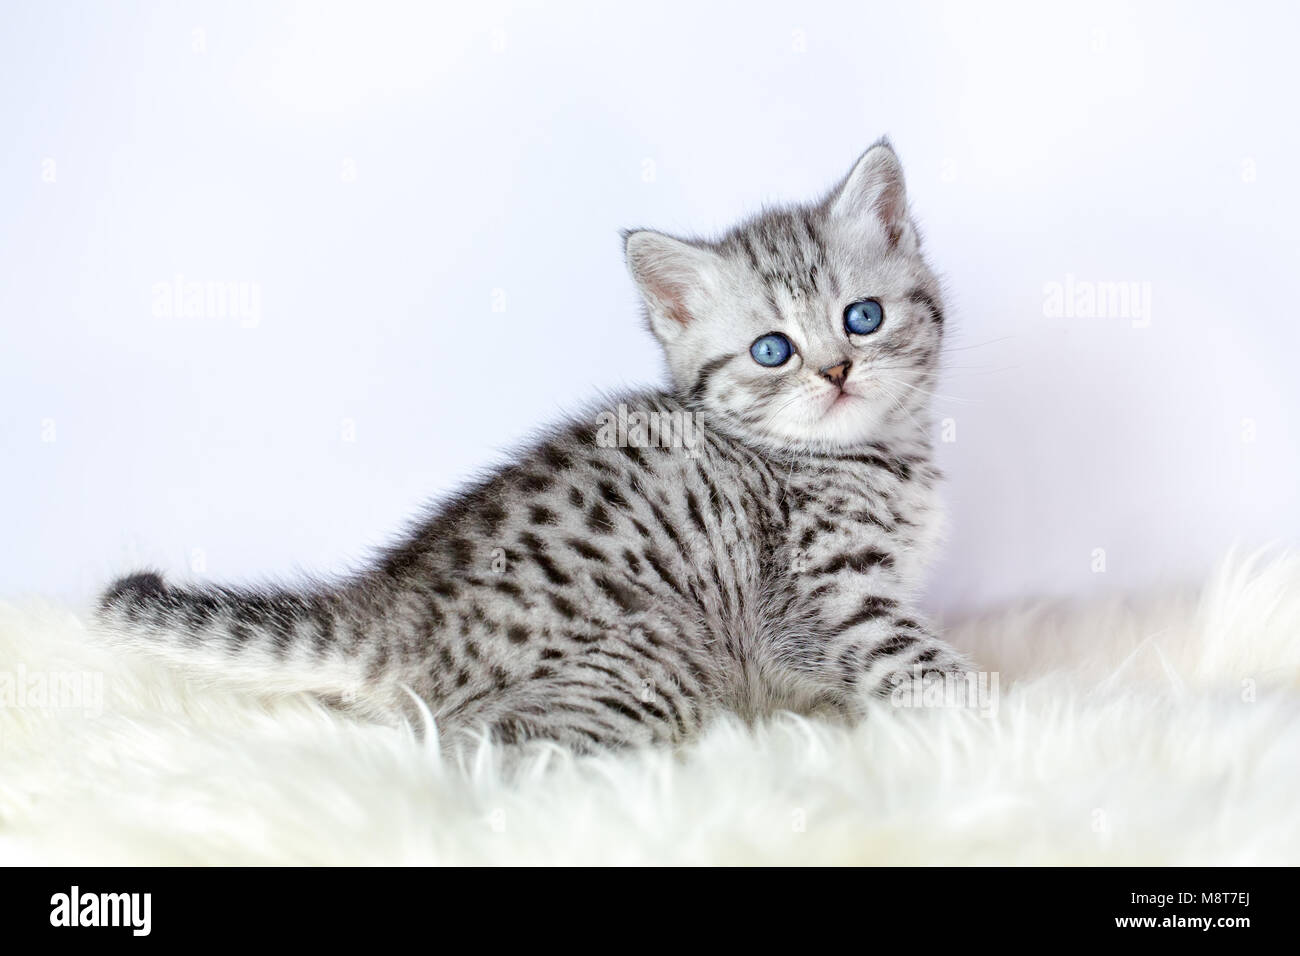 Young black silver tabby cat sitting on sheepskin Stock Photo